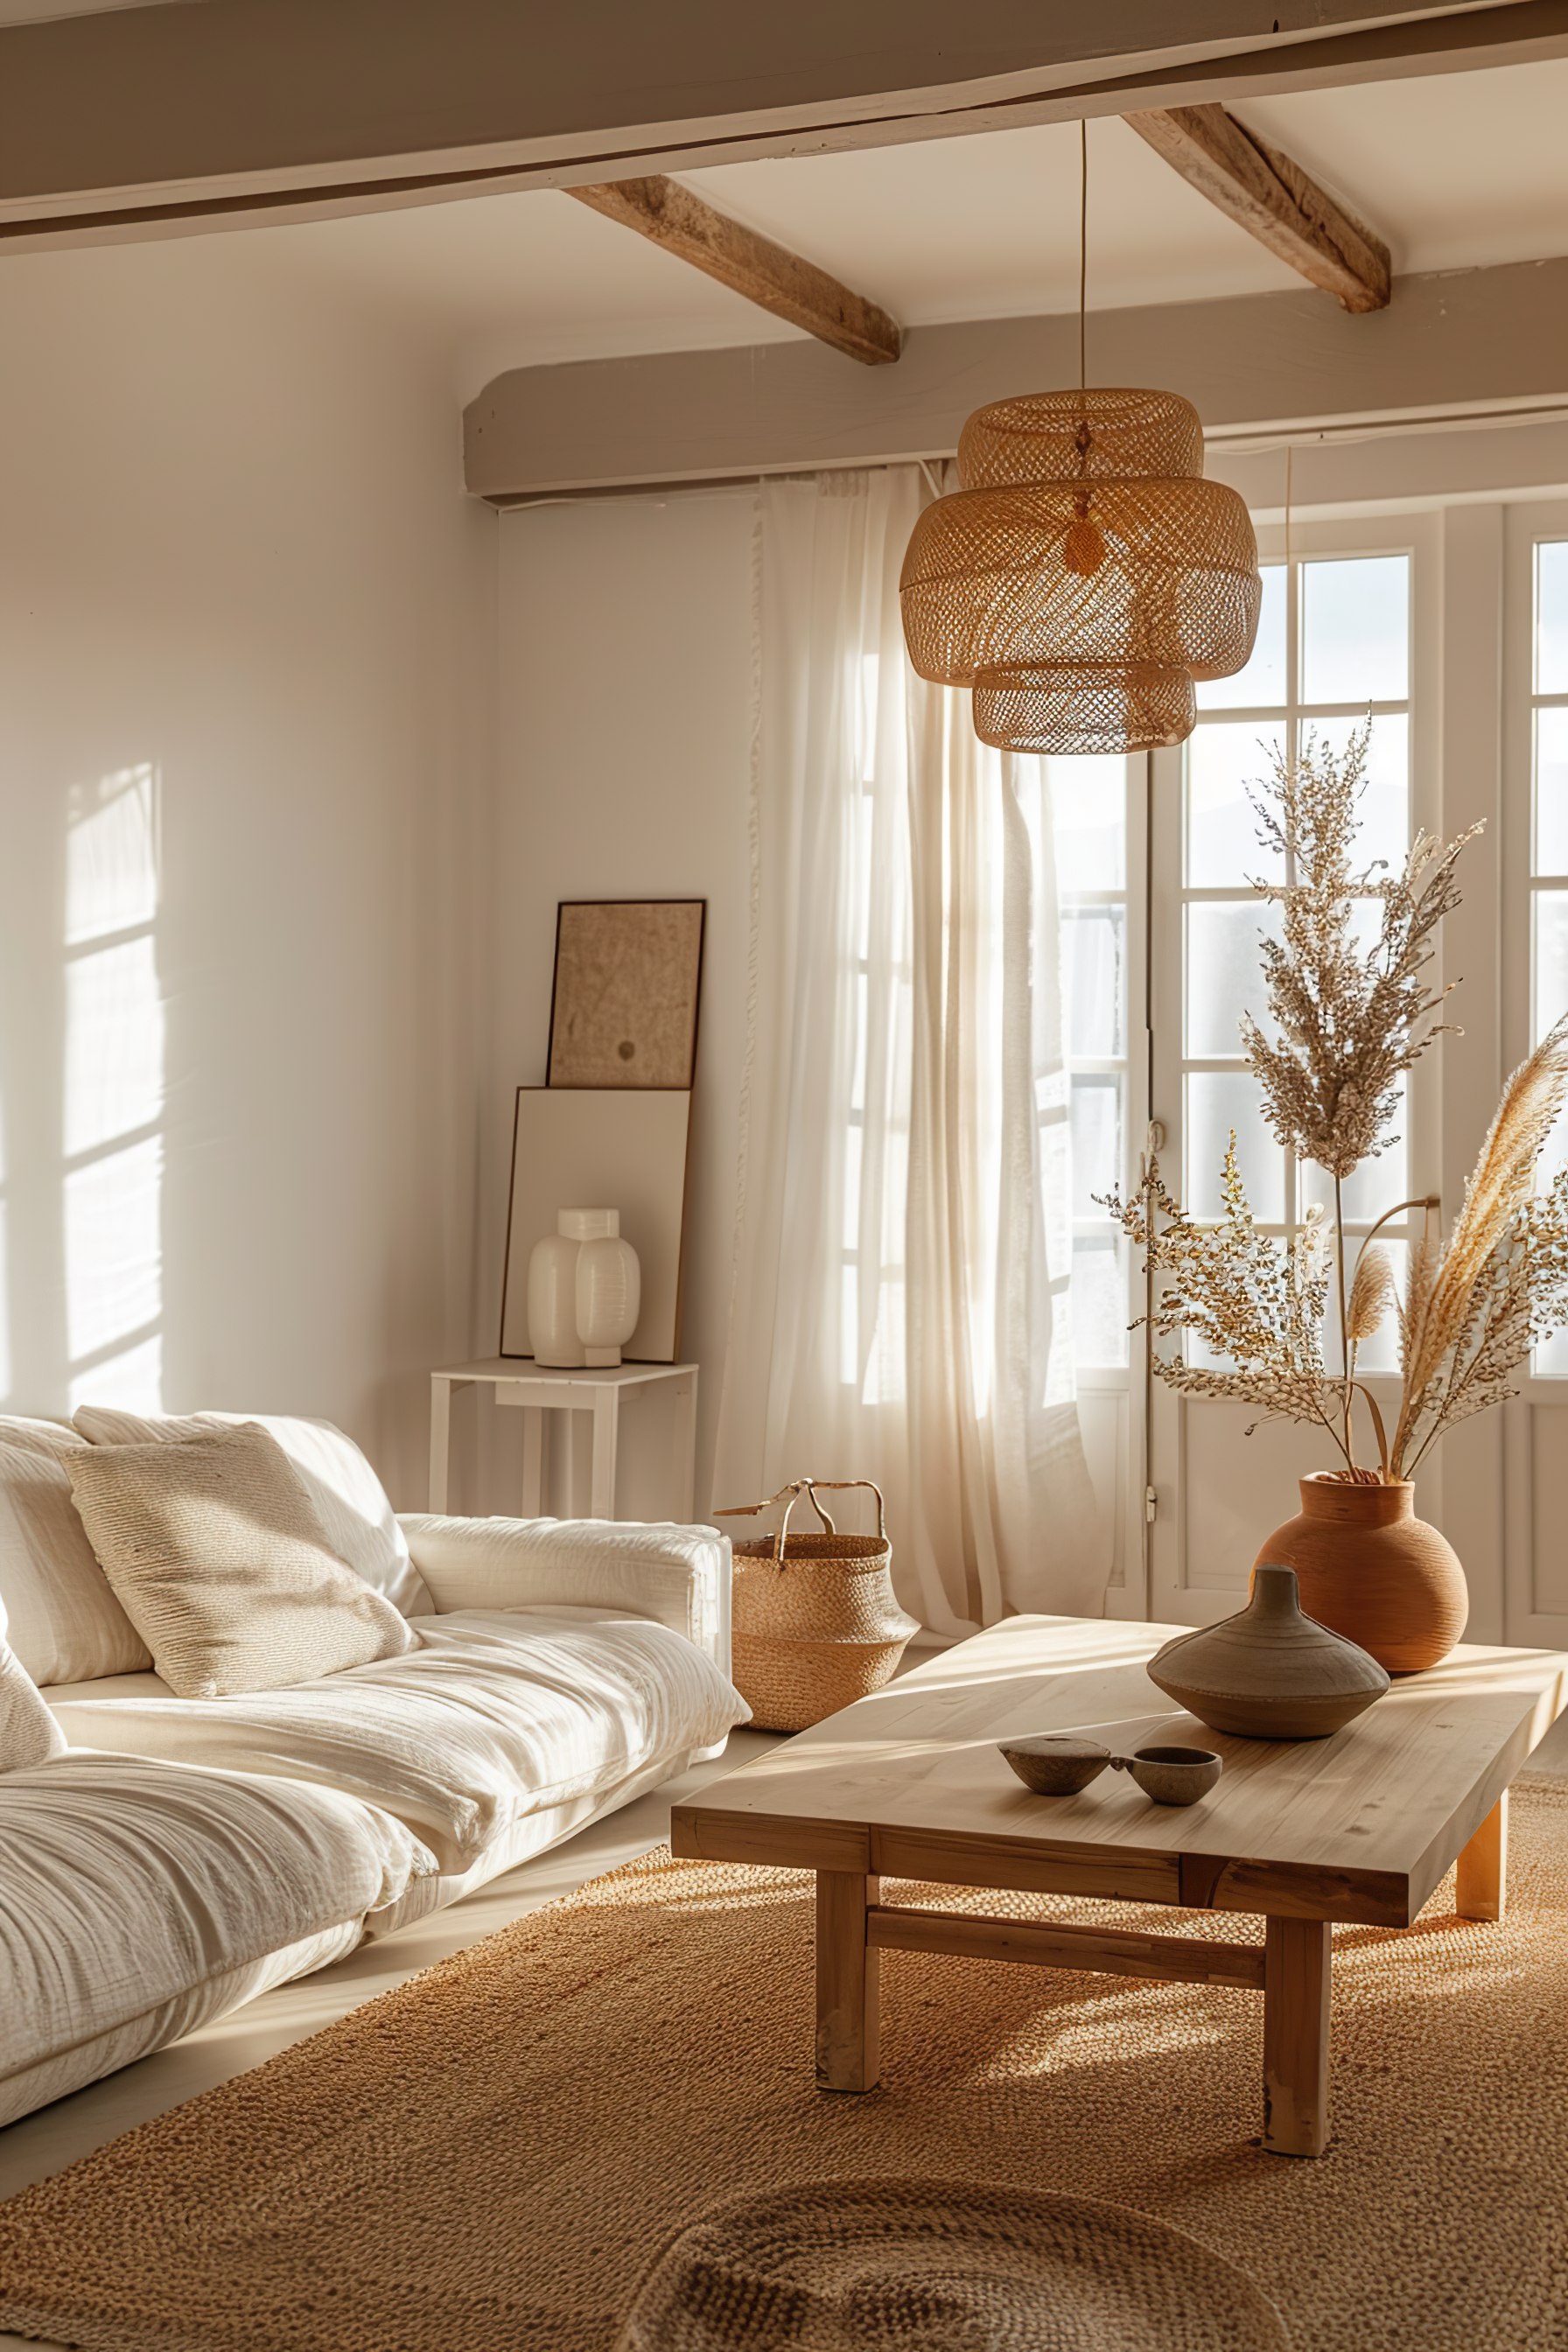 Cozy sunlit living room with beige sofa, wooden table, wicker lamps, and dried plants in a clay vase.